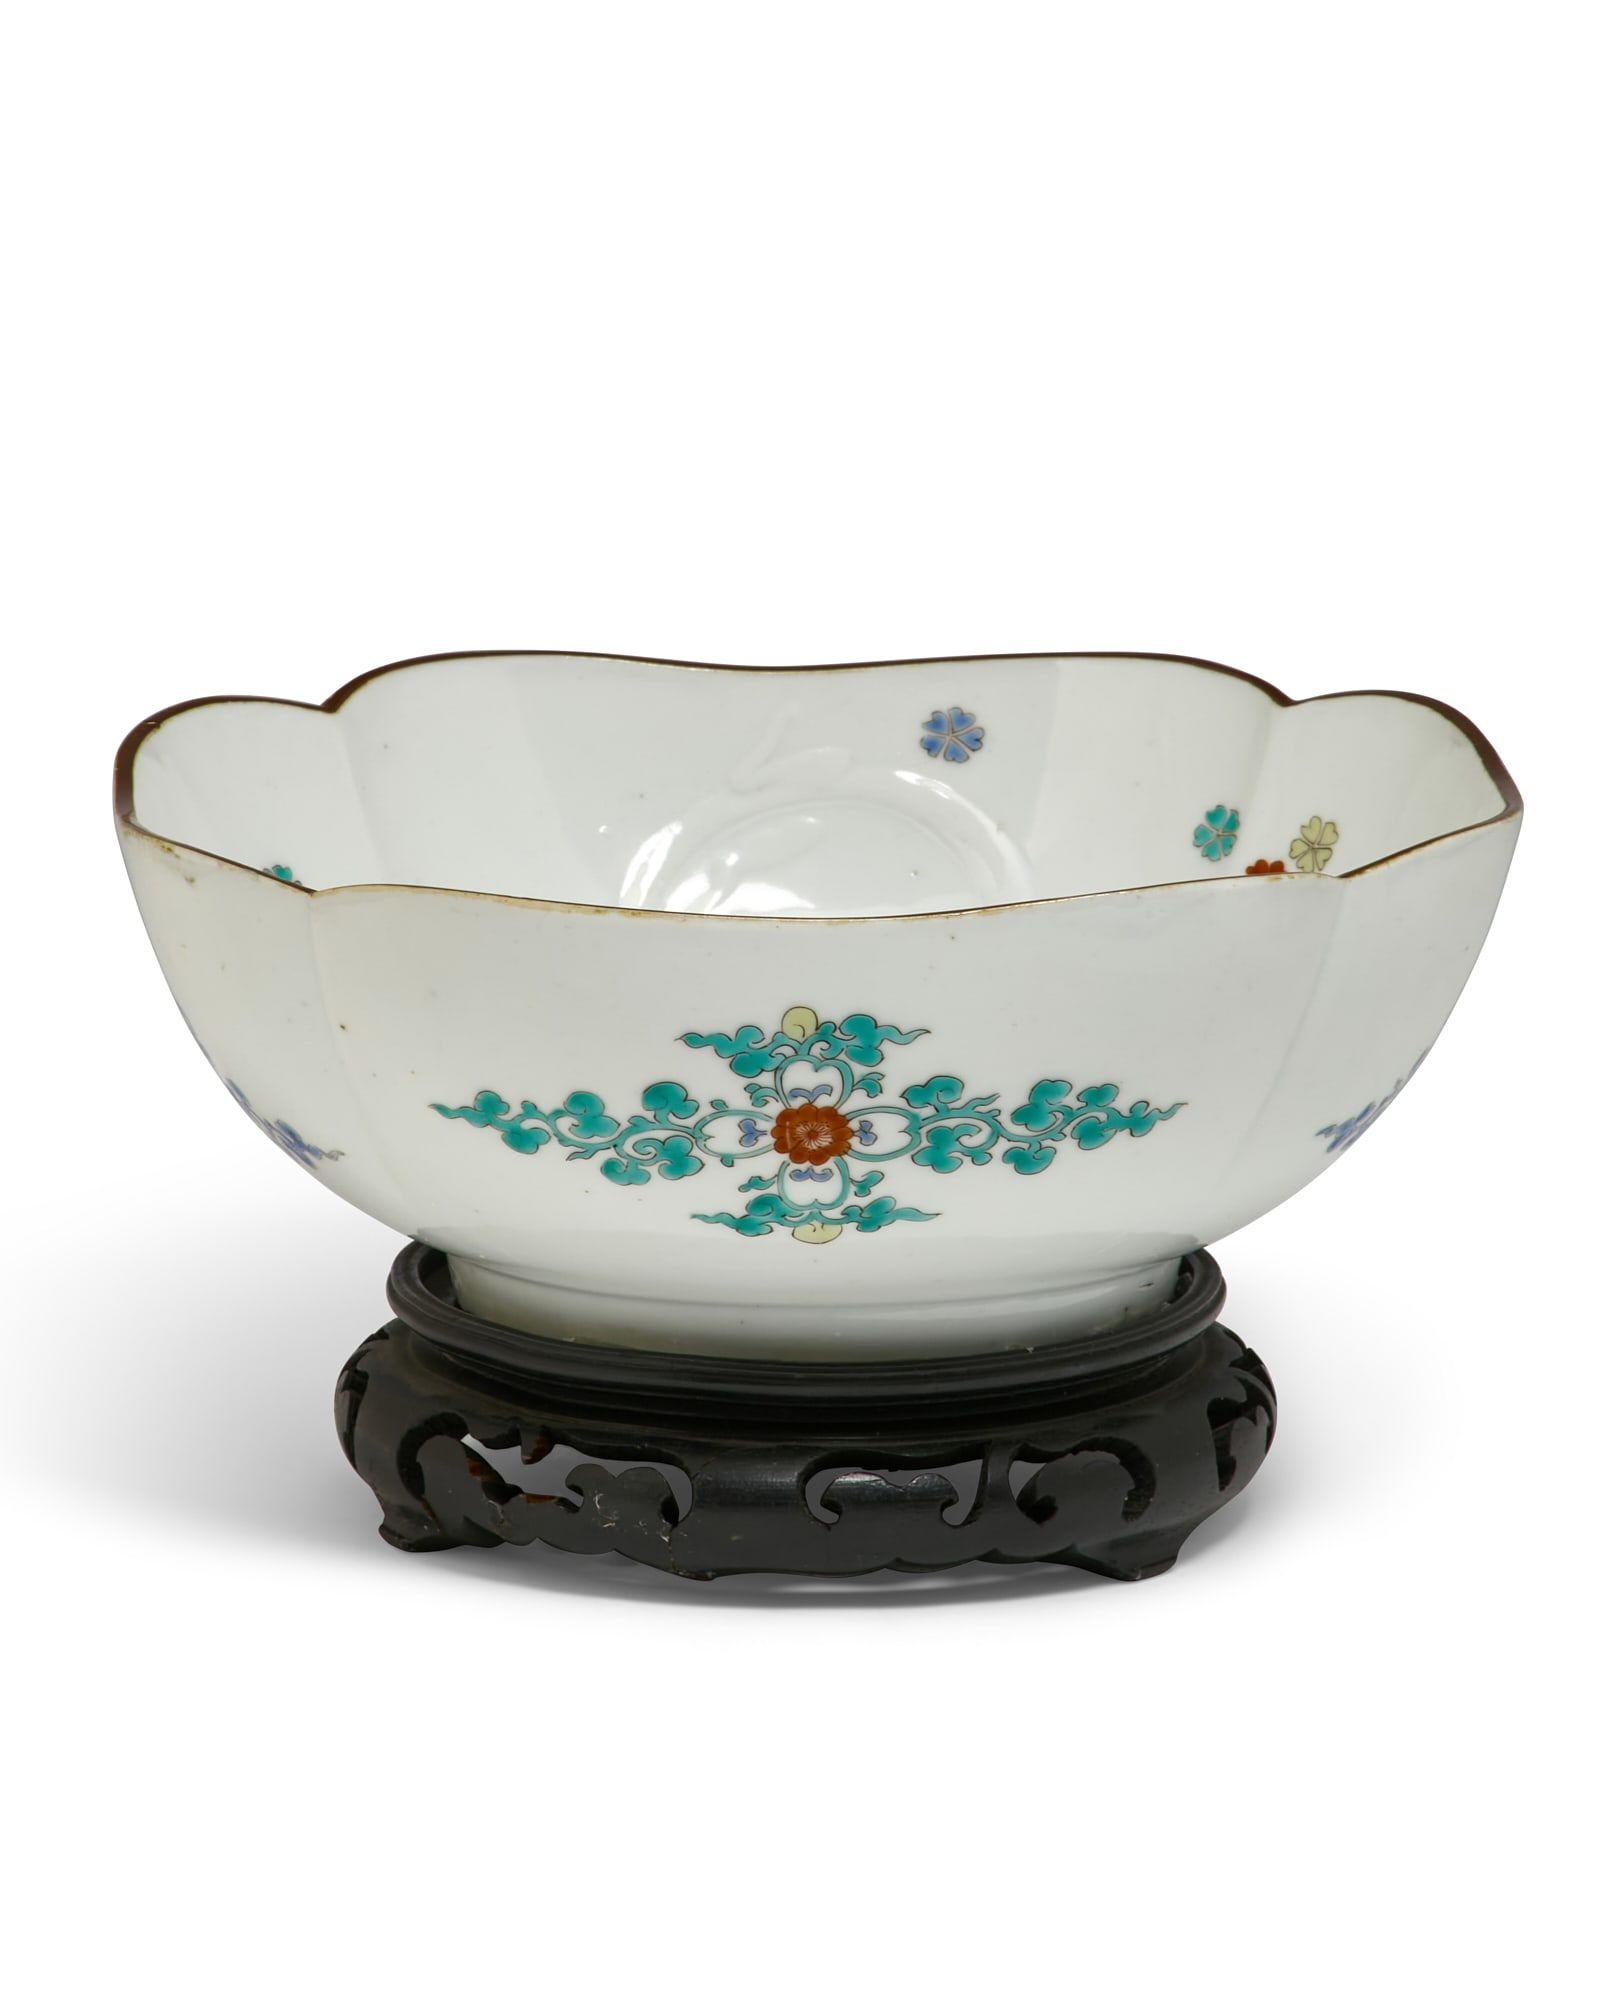 A FLORAL DECORATED PORCELAIN BOWL, POSSIBLY